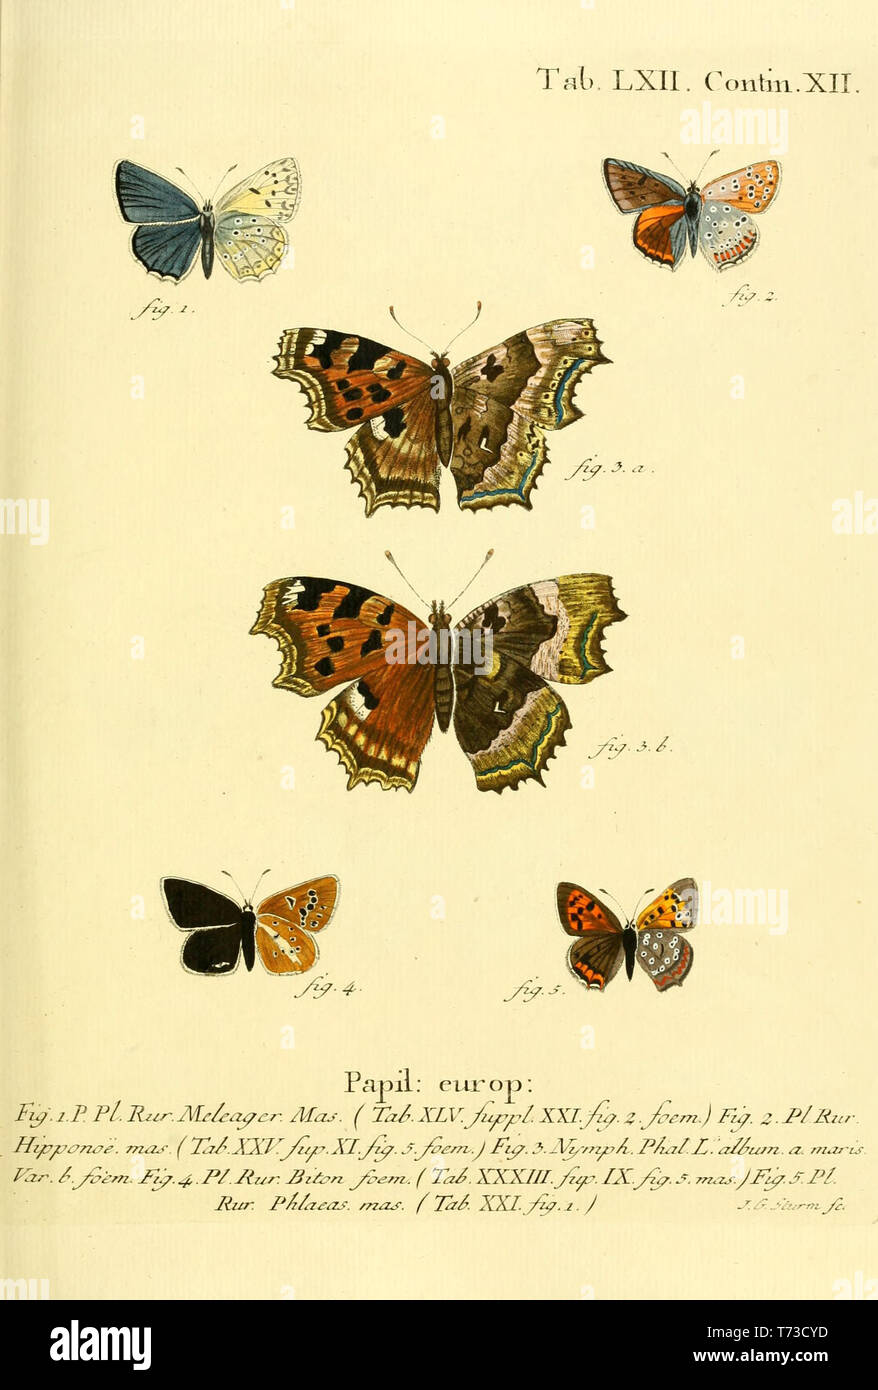 Beautiful vintage hand drawn illustrations of European butterfly from old book. Can be used as poster or decorative element for interior design. Stock Photo